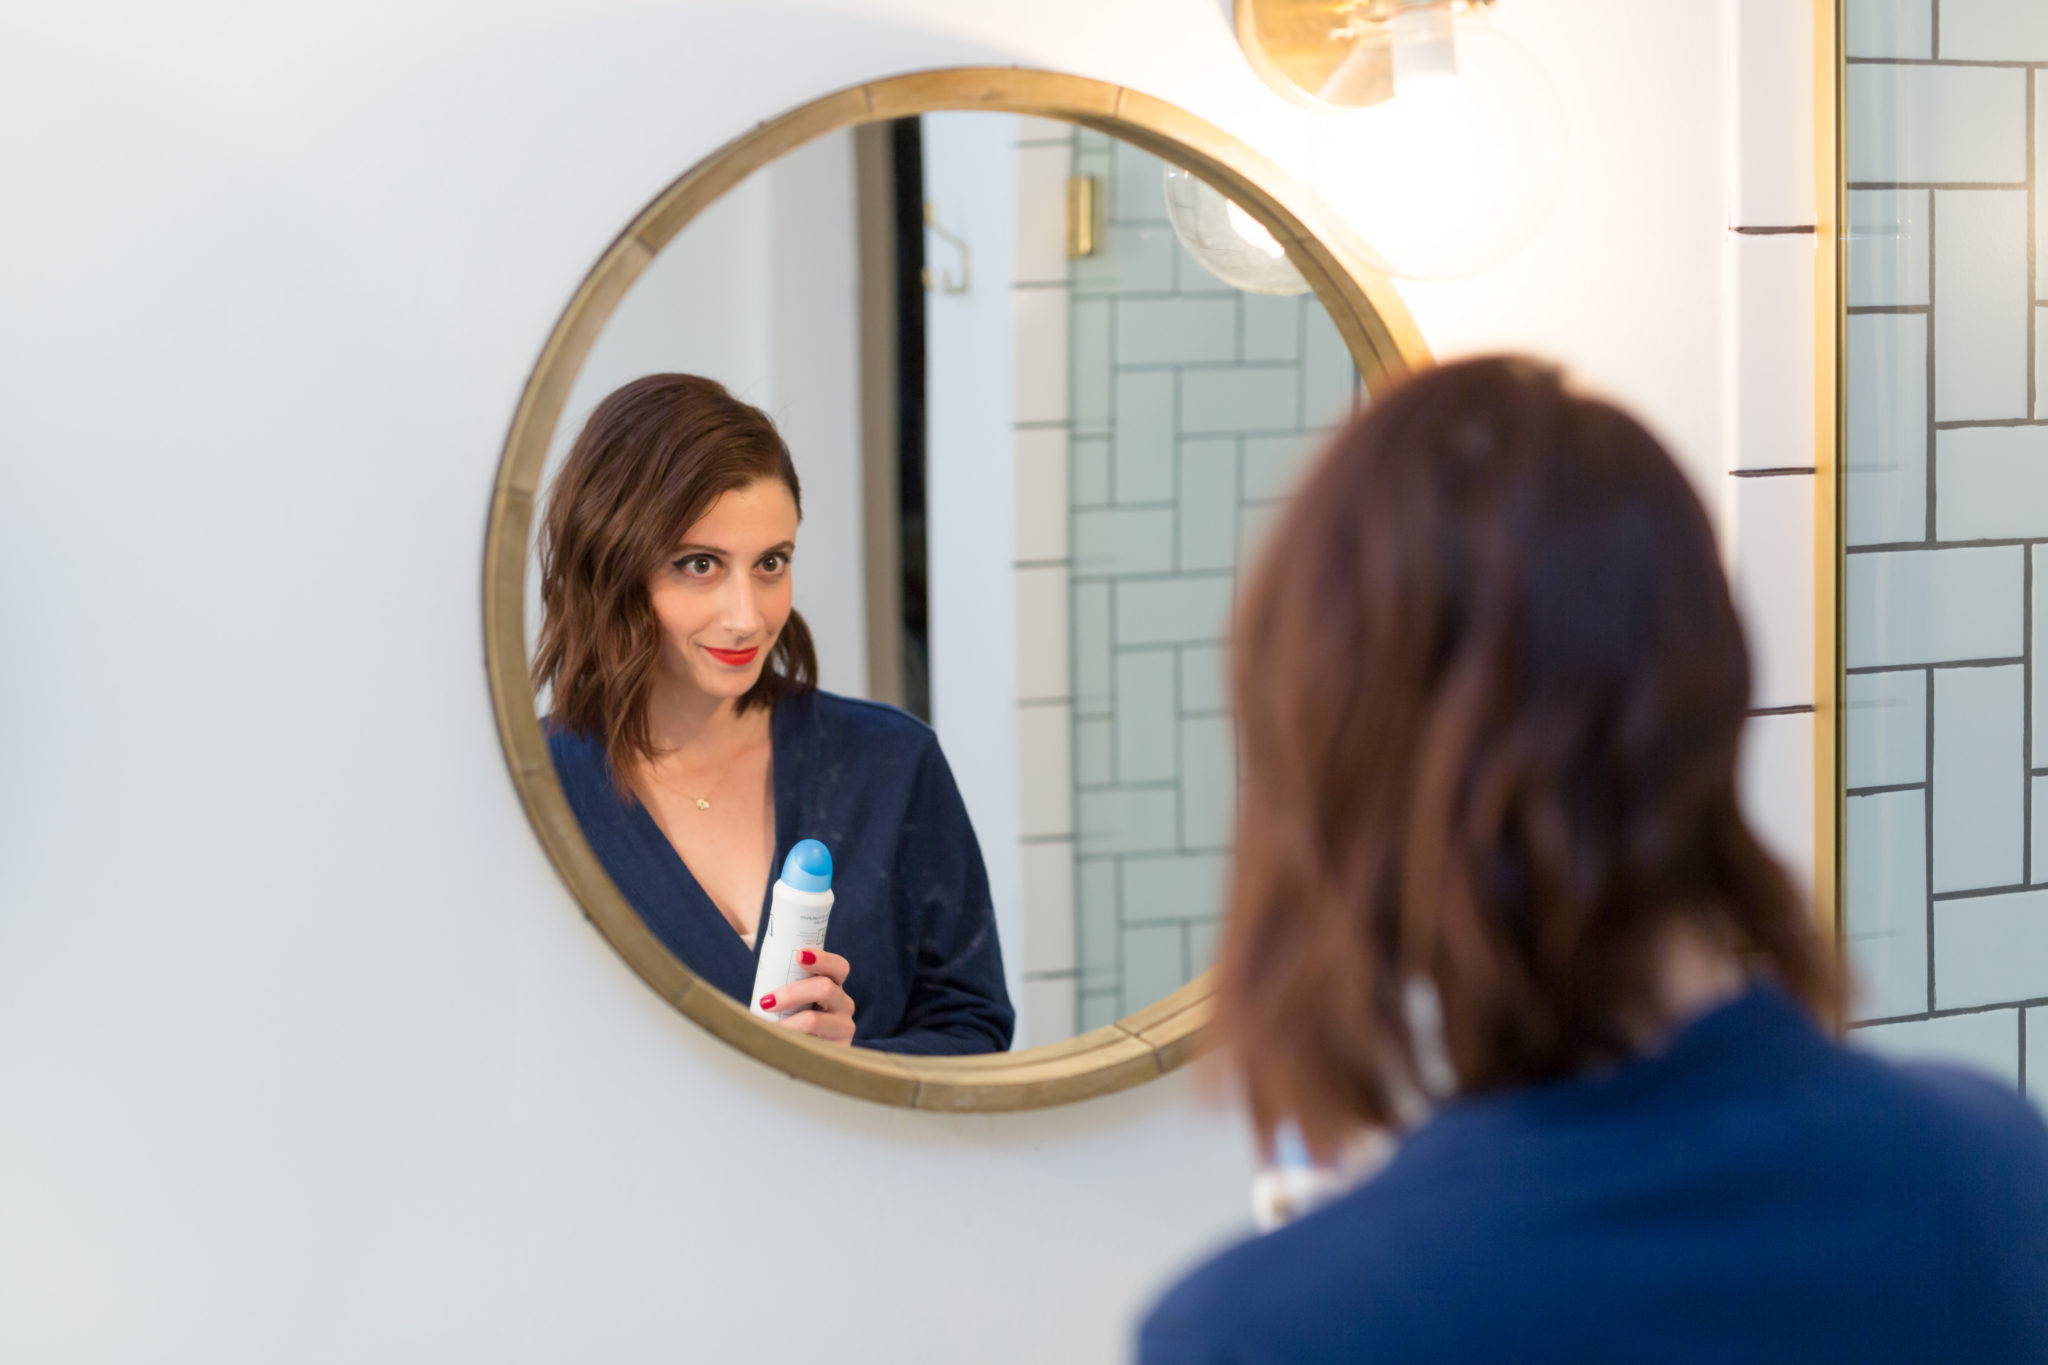 how to get ready for a holiday party in minutes on allweareblog.com | review of dove dry spray